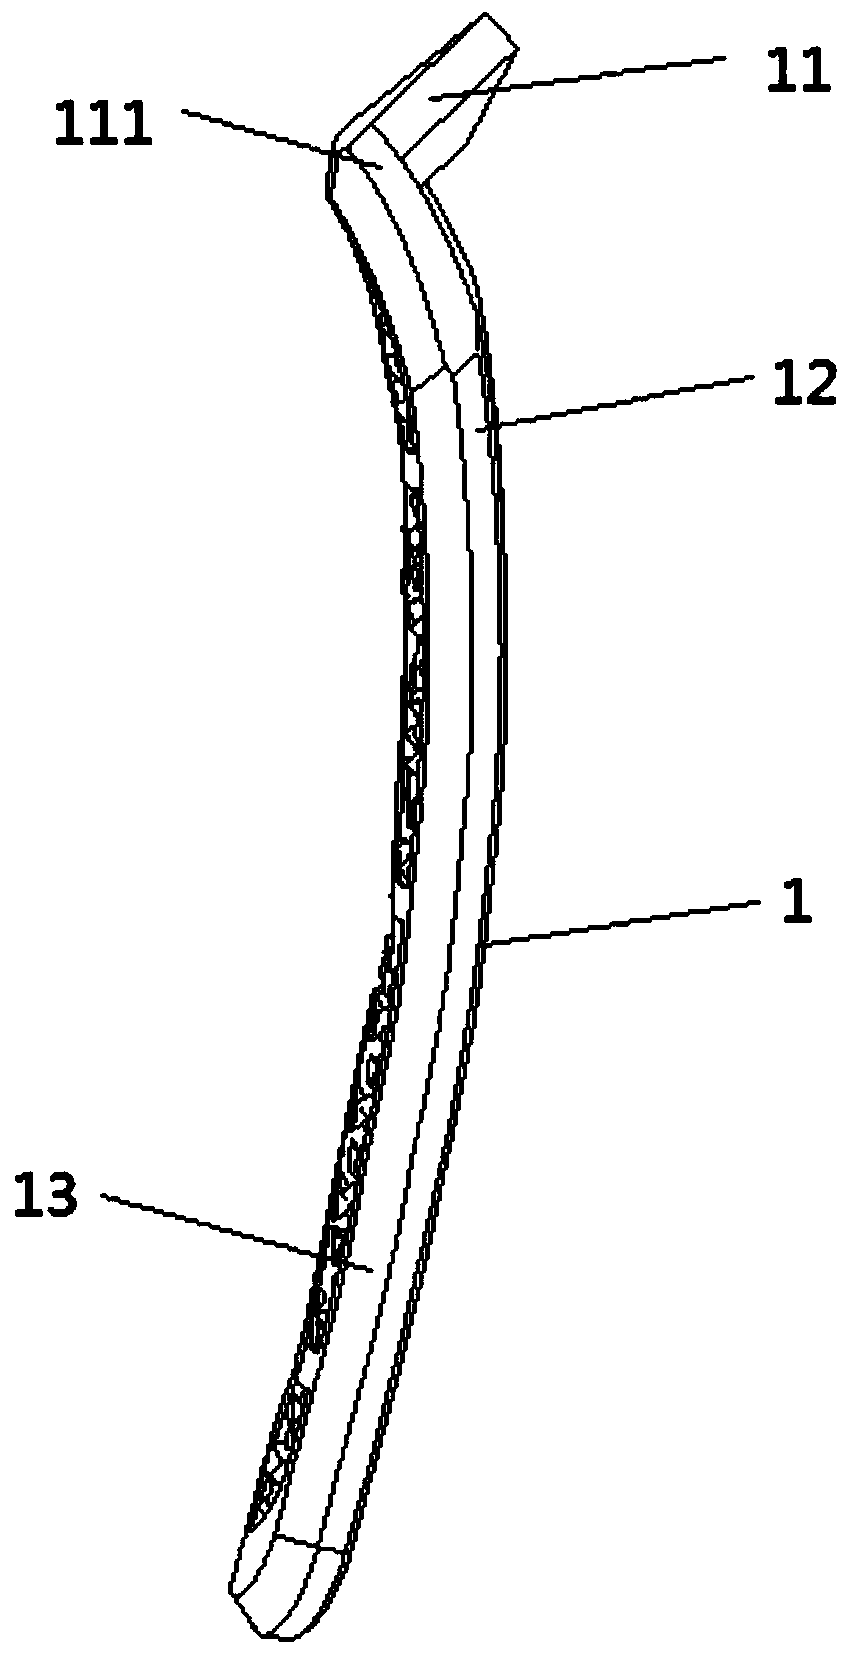 Auxiliary resetting internal fixing device for femoral neck fracture